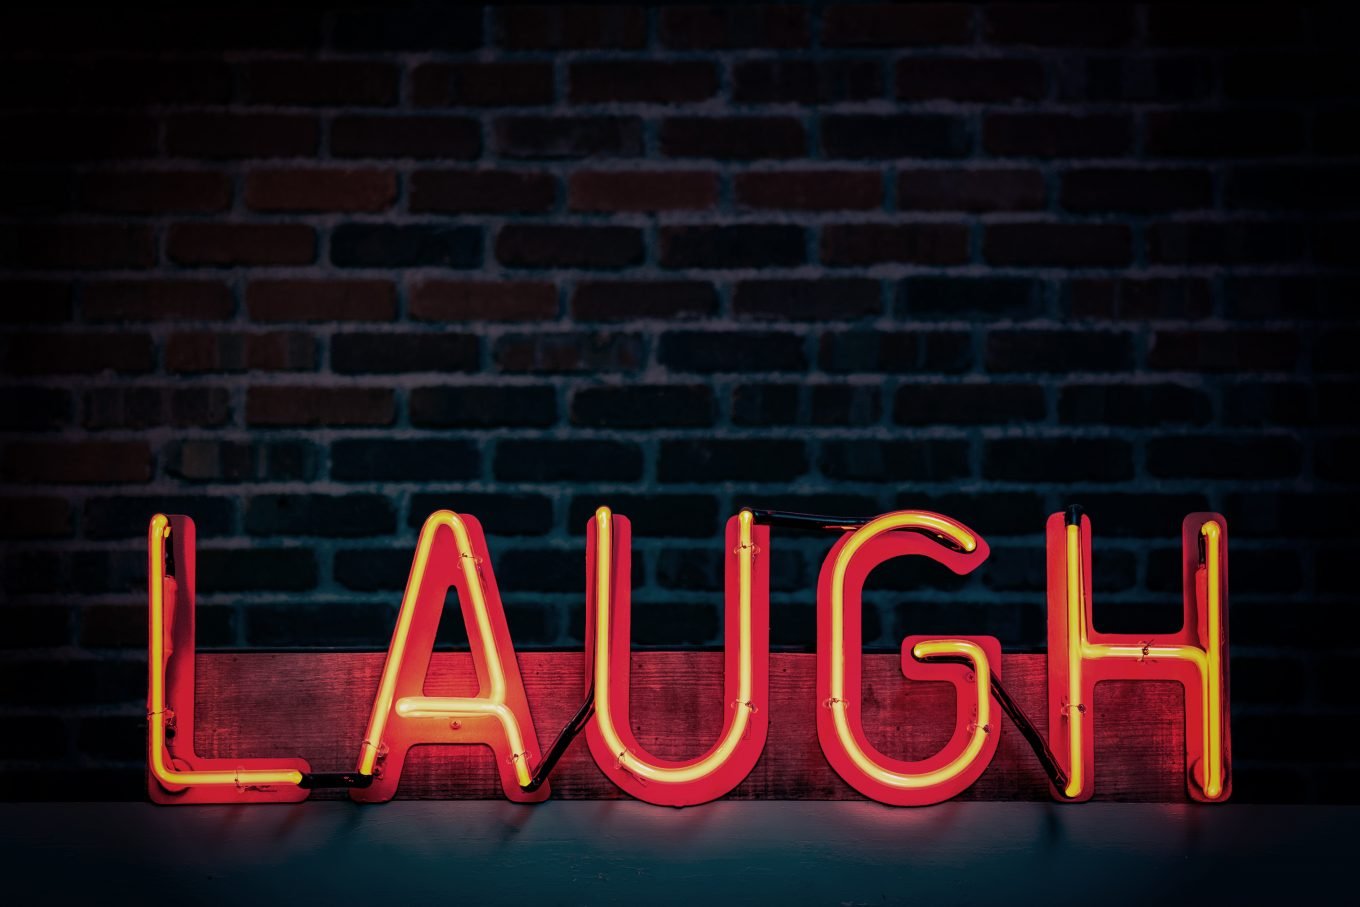 Use humour while speaking